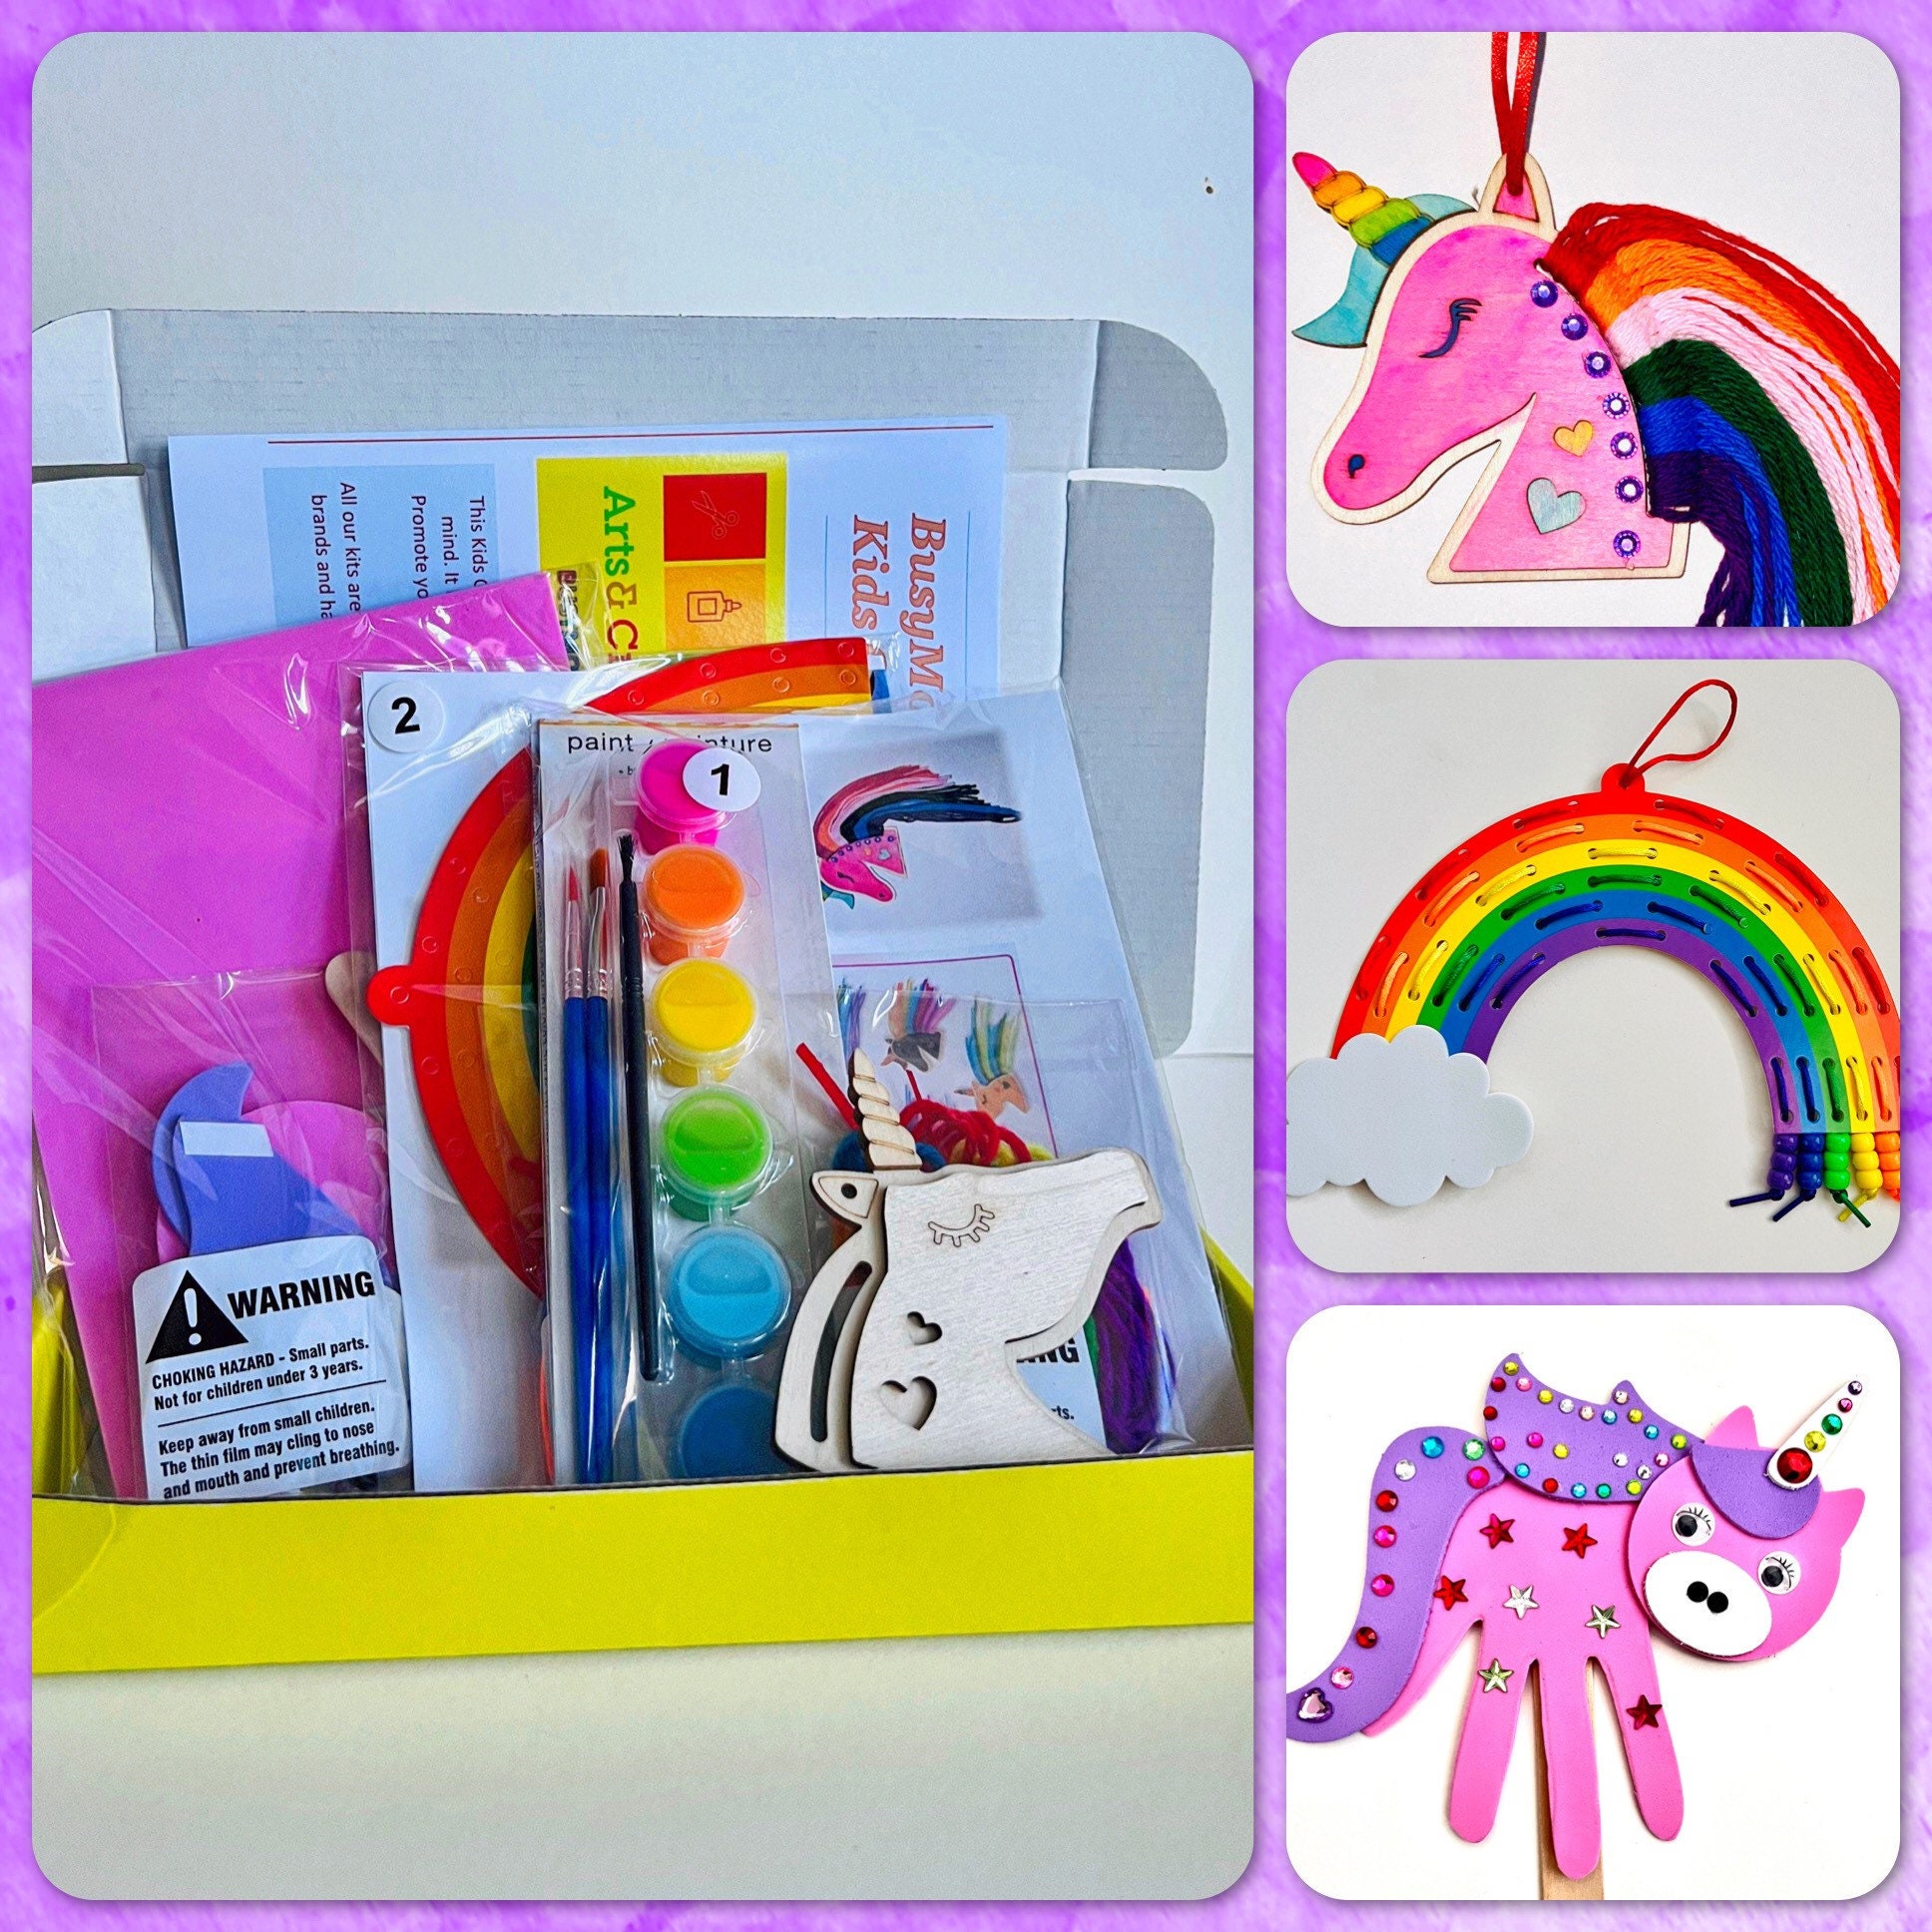 Dikence 4 5 6 7 8 Year Old Girls Gifts Craft Kits for Kids Sewing Kts for  Children Unicorn Gifts for Girls Arts and Crafts for Kids Age 6-8 Year Old  Girl